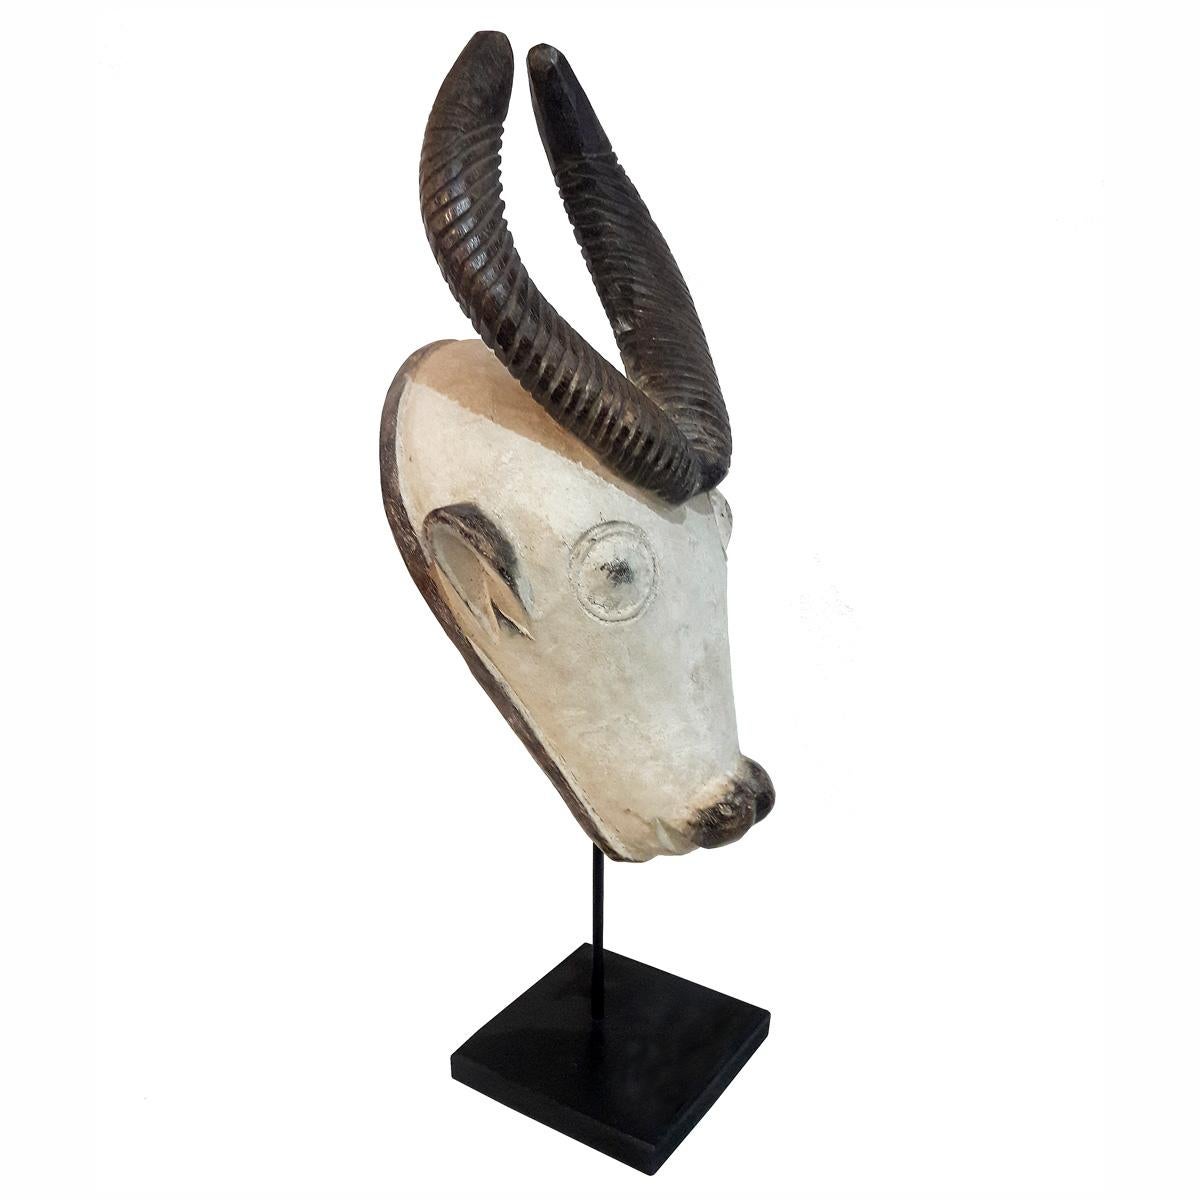 A hand carved Baule mask representing an antelope, from Ivory Coast, late 1960s. Mounted on a black metal stand.